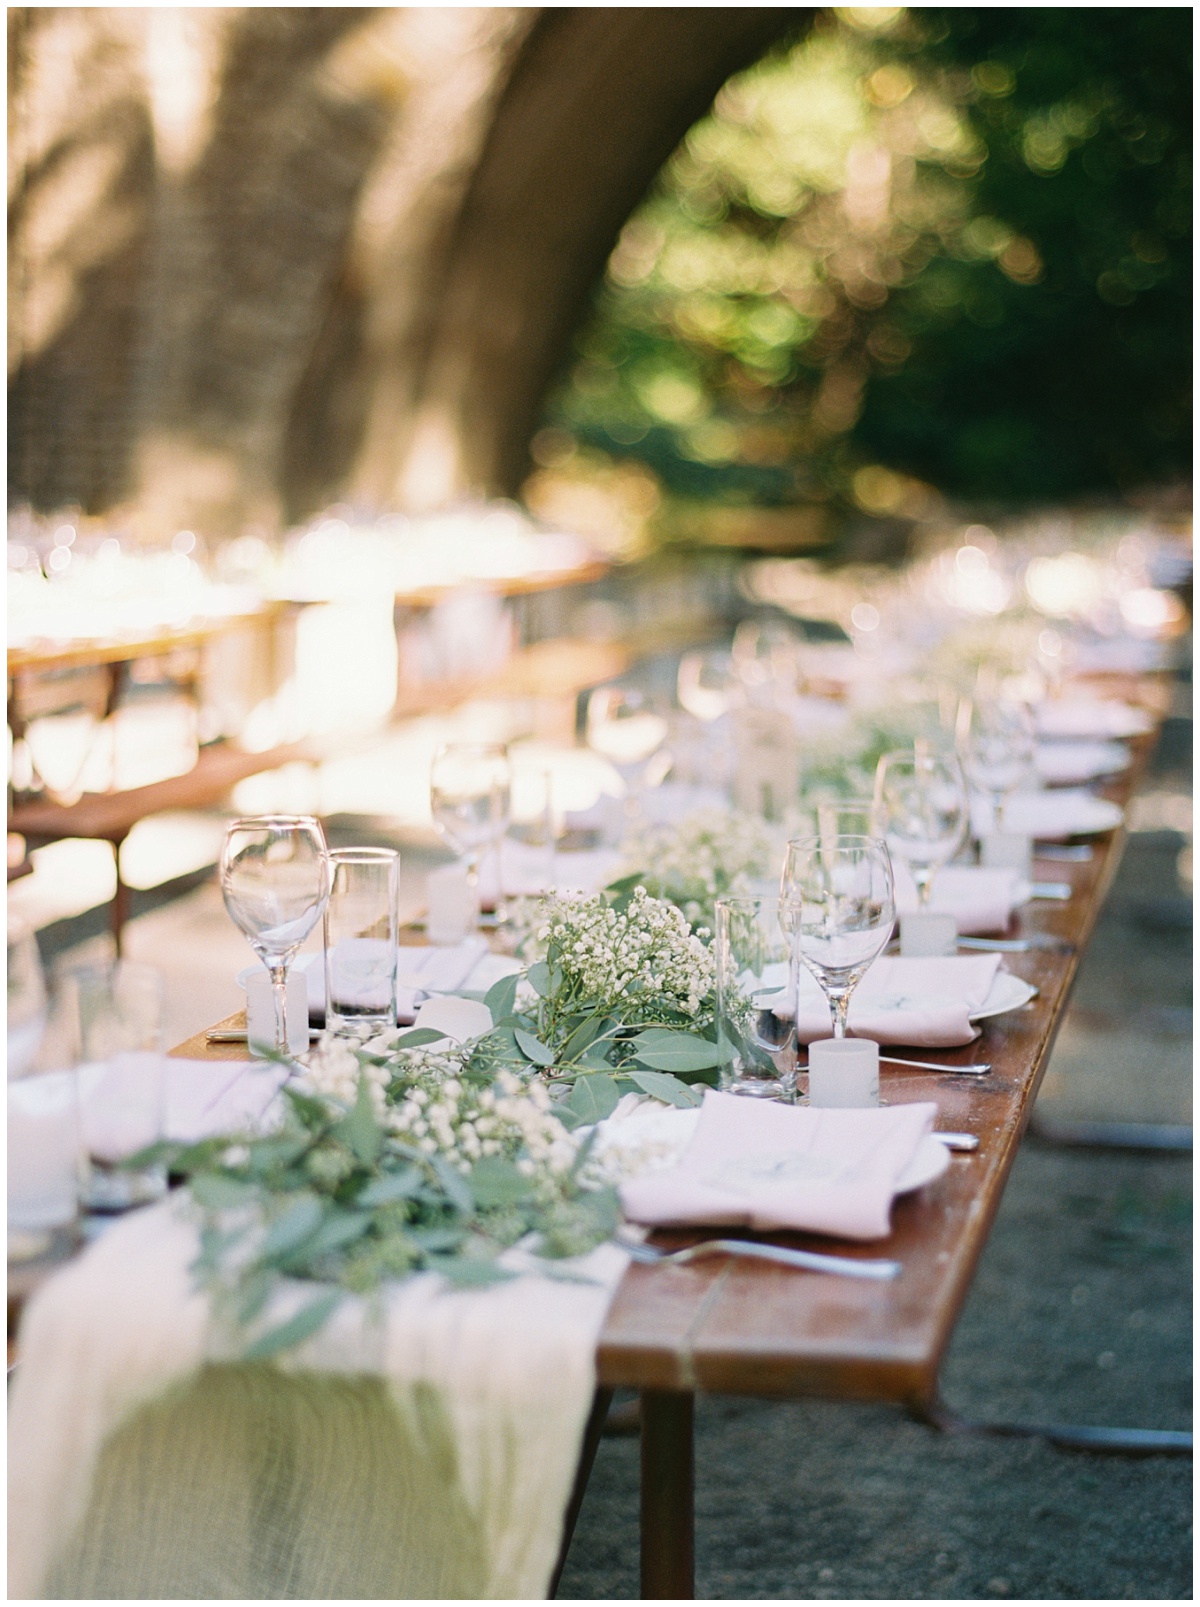 Wedding Details of Tables